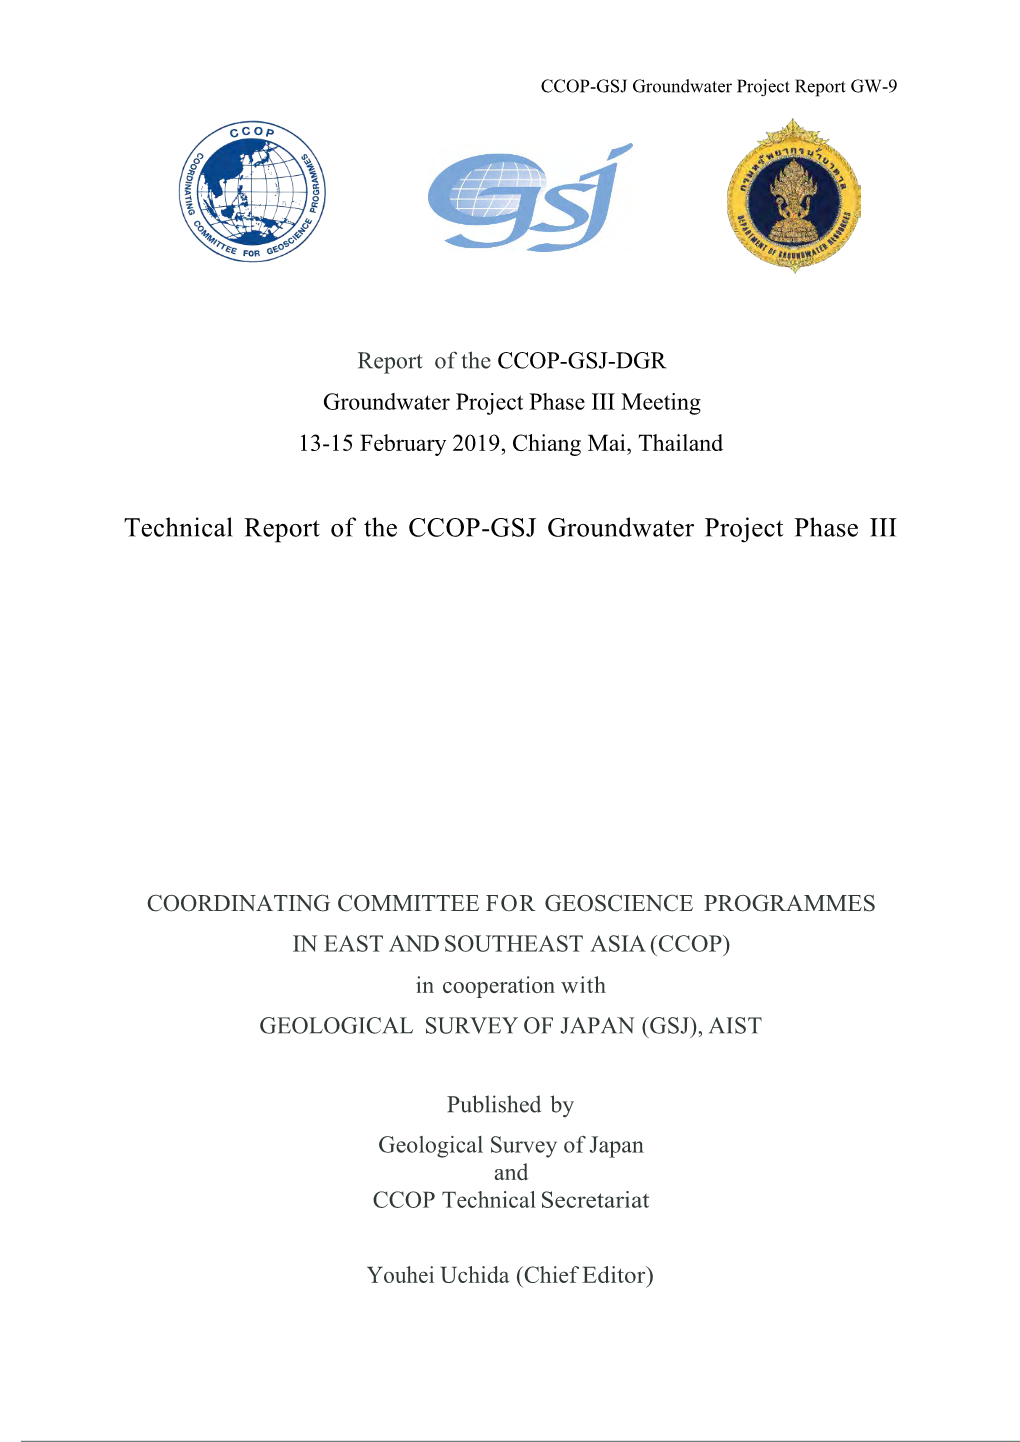 Report of the CCOP-GSJ-DGR Groundwater Project Phase III Meeting 13-15 February 2019, Chiang Mai, Thailand